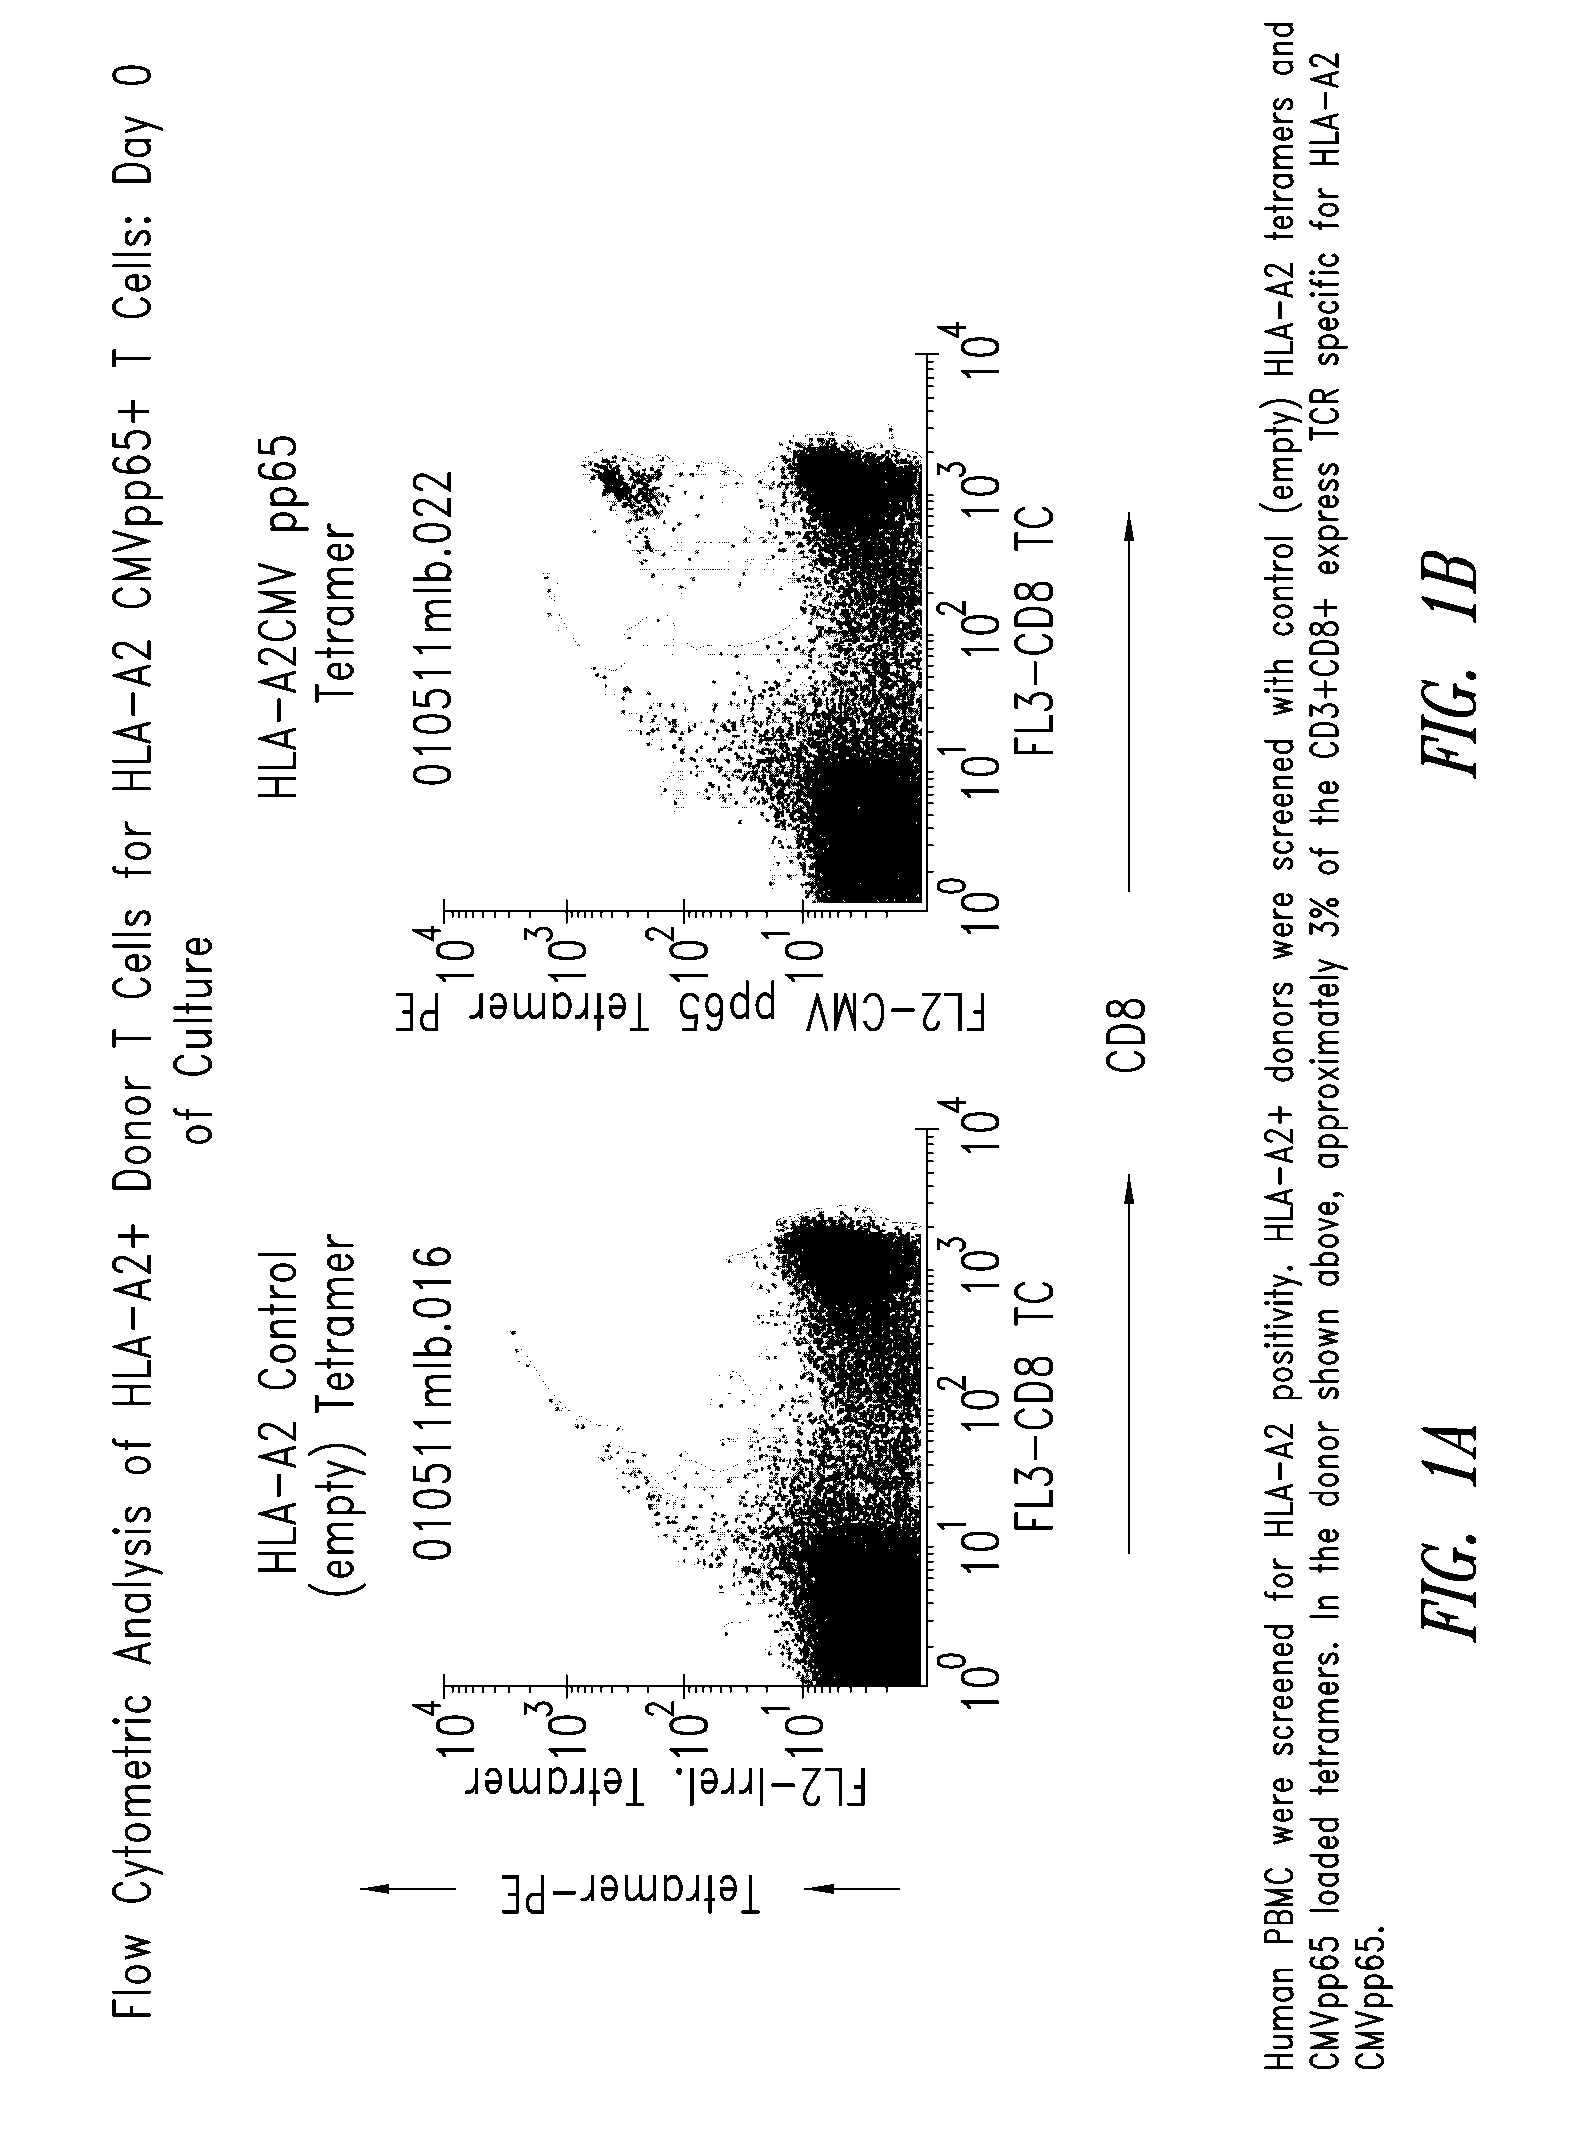 Compositions and methods for eliminating undesired subpopulations of t cells in patients with immunological defects related to autoimmunity and organ or hematopoietic stem cell transplantation